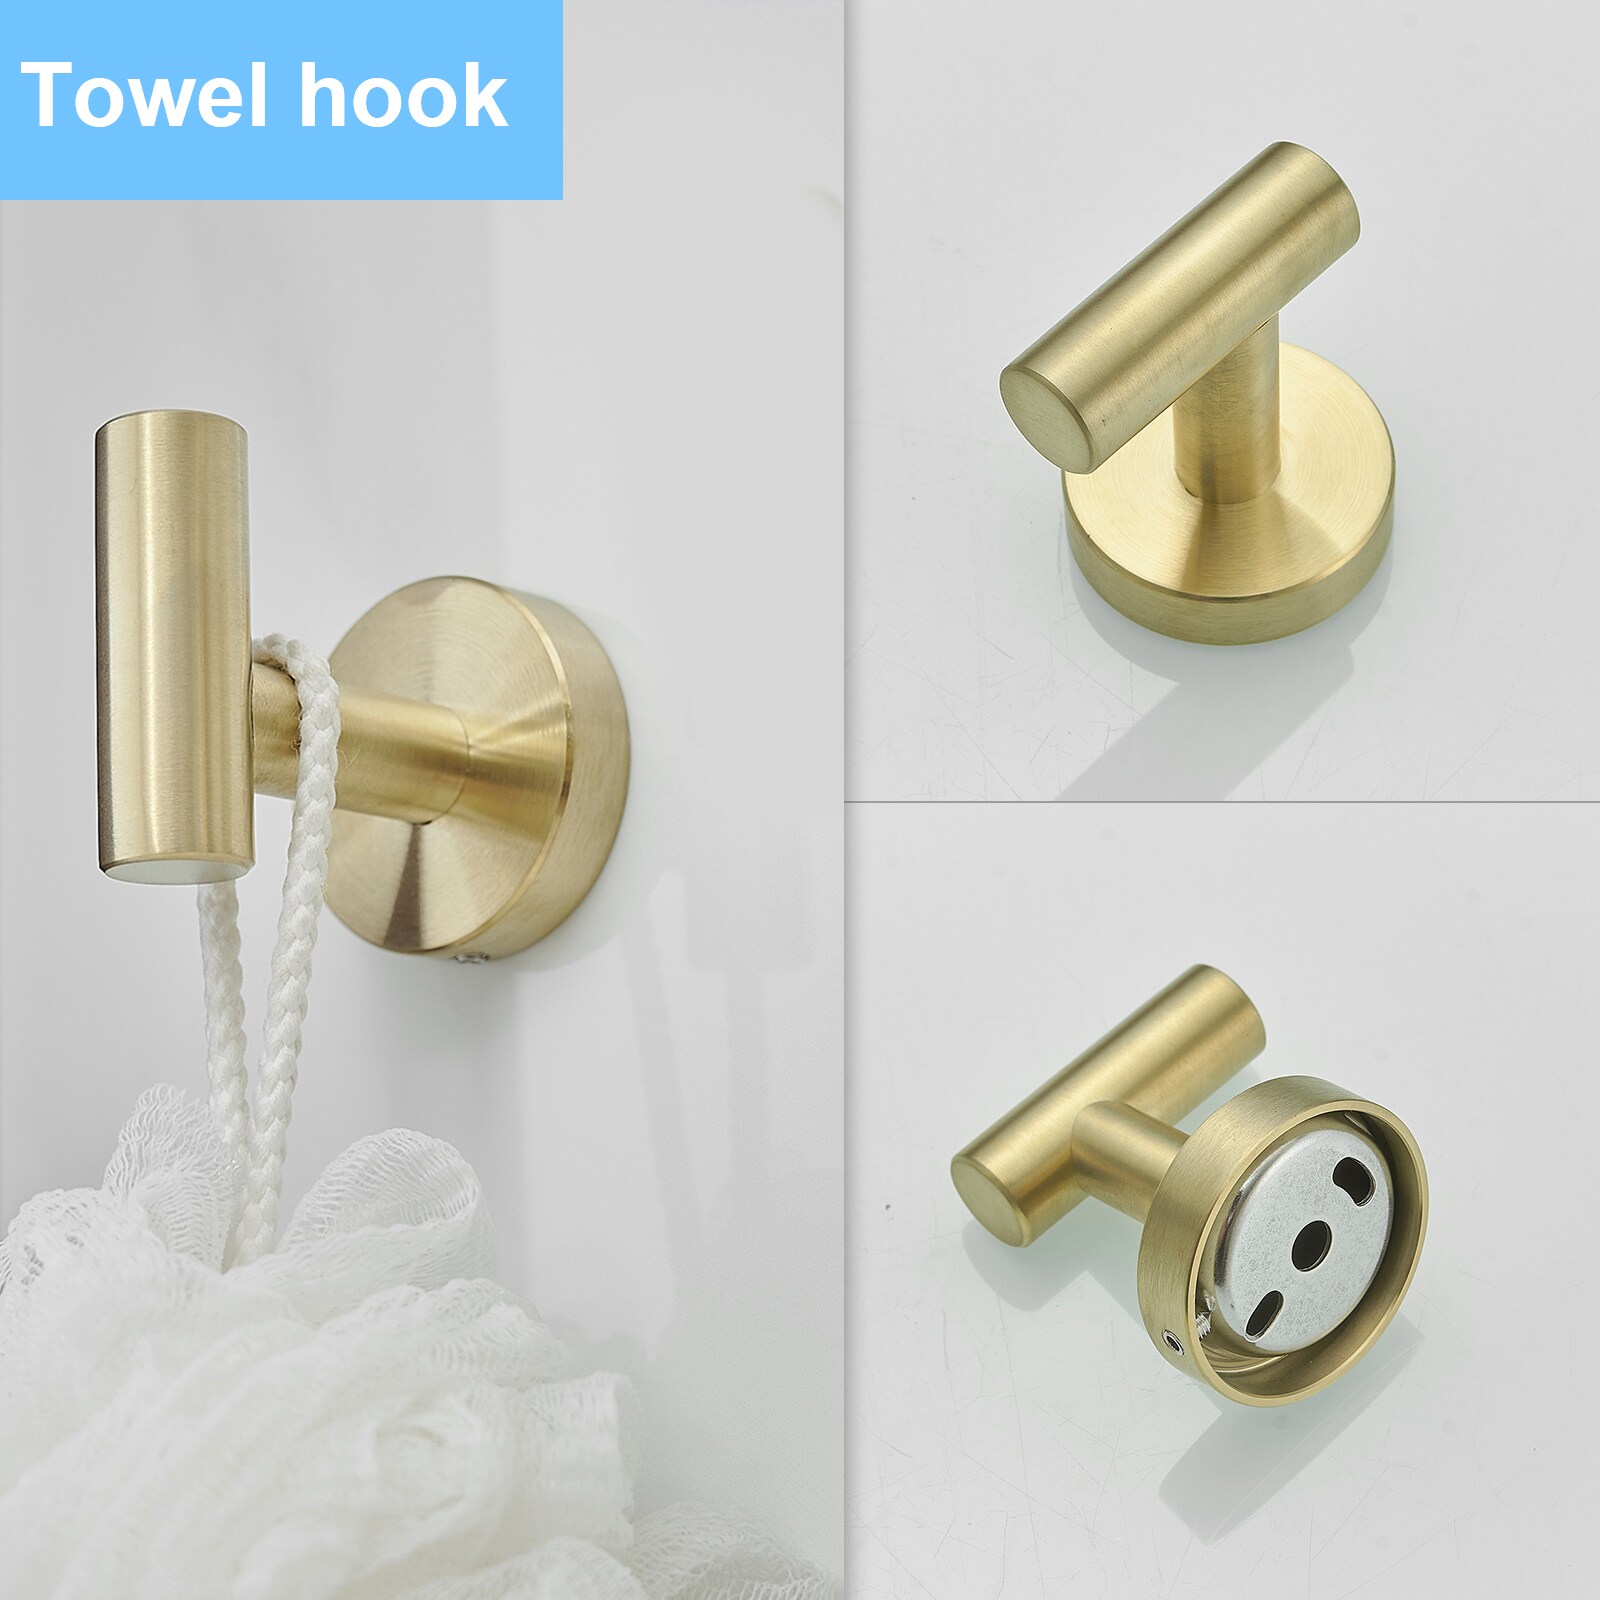 BWE 5-Piece Bath Hardware Set with Towel Bar Hook Toilet Paper Holder and Towel  Ring in Br